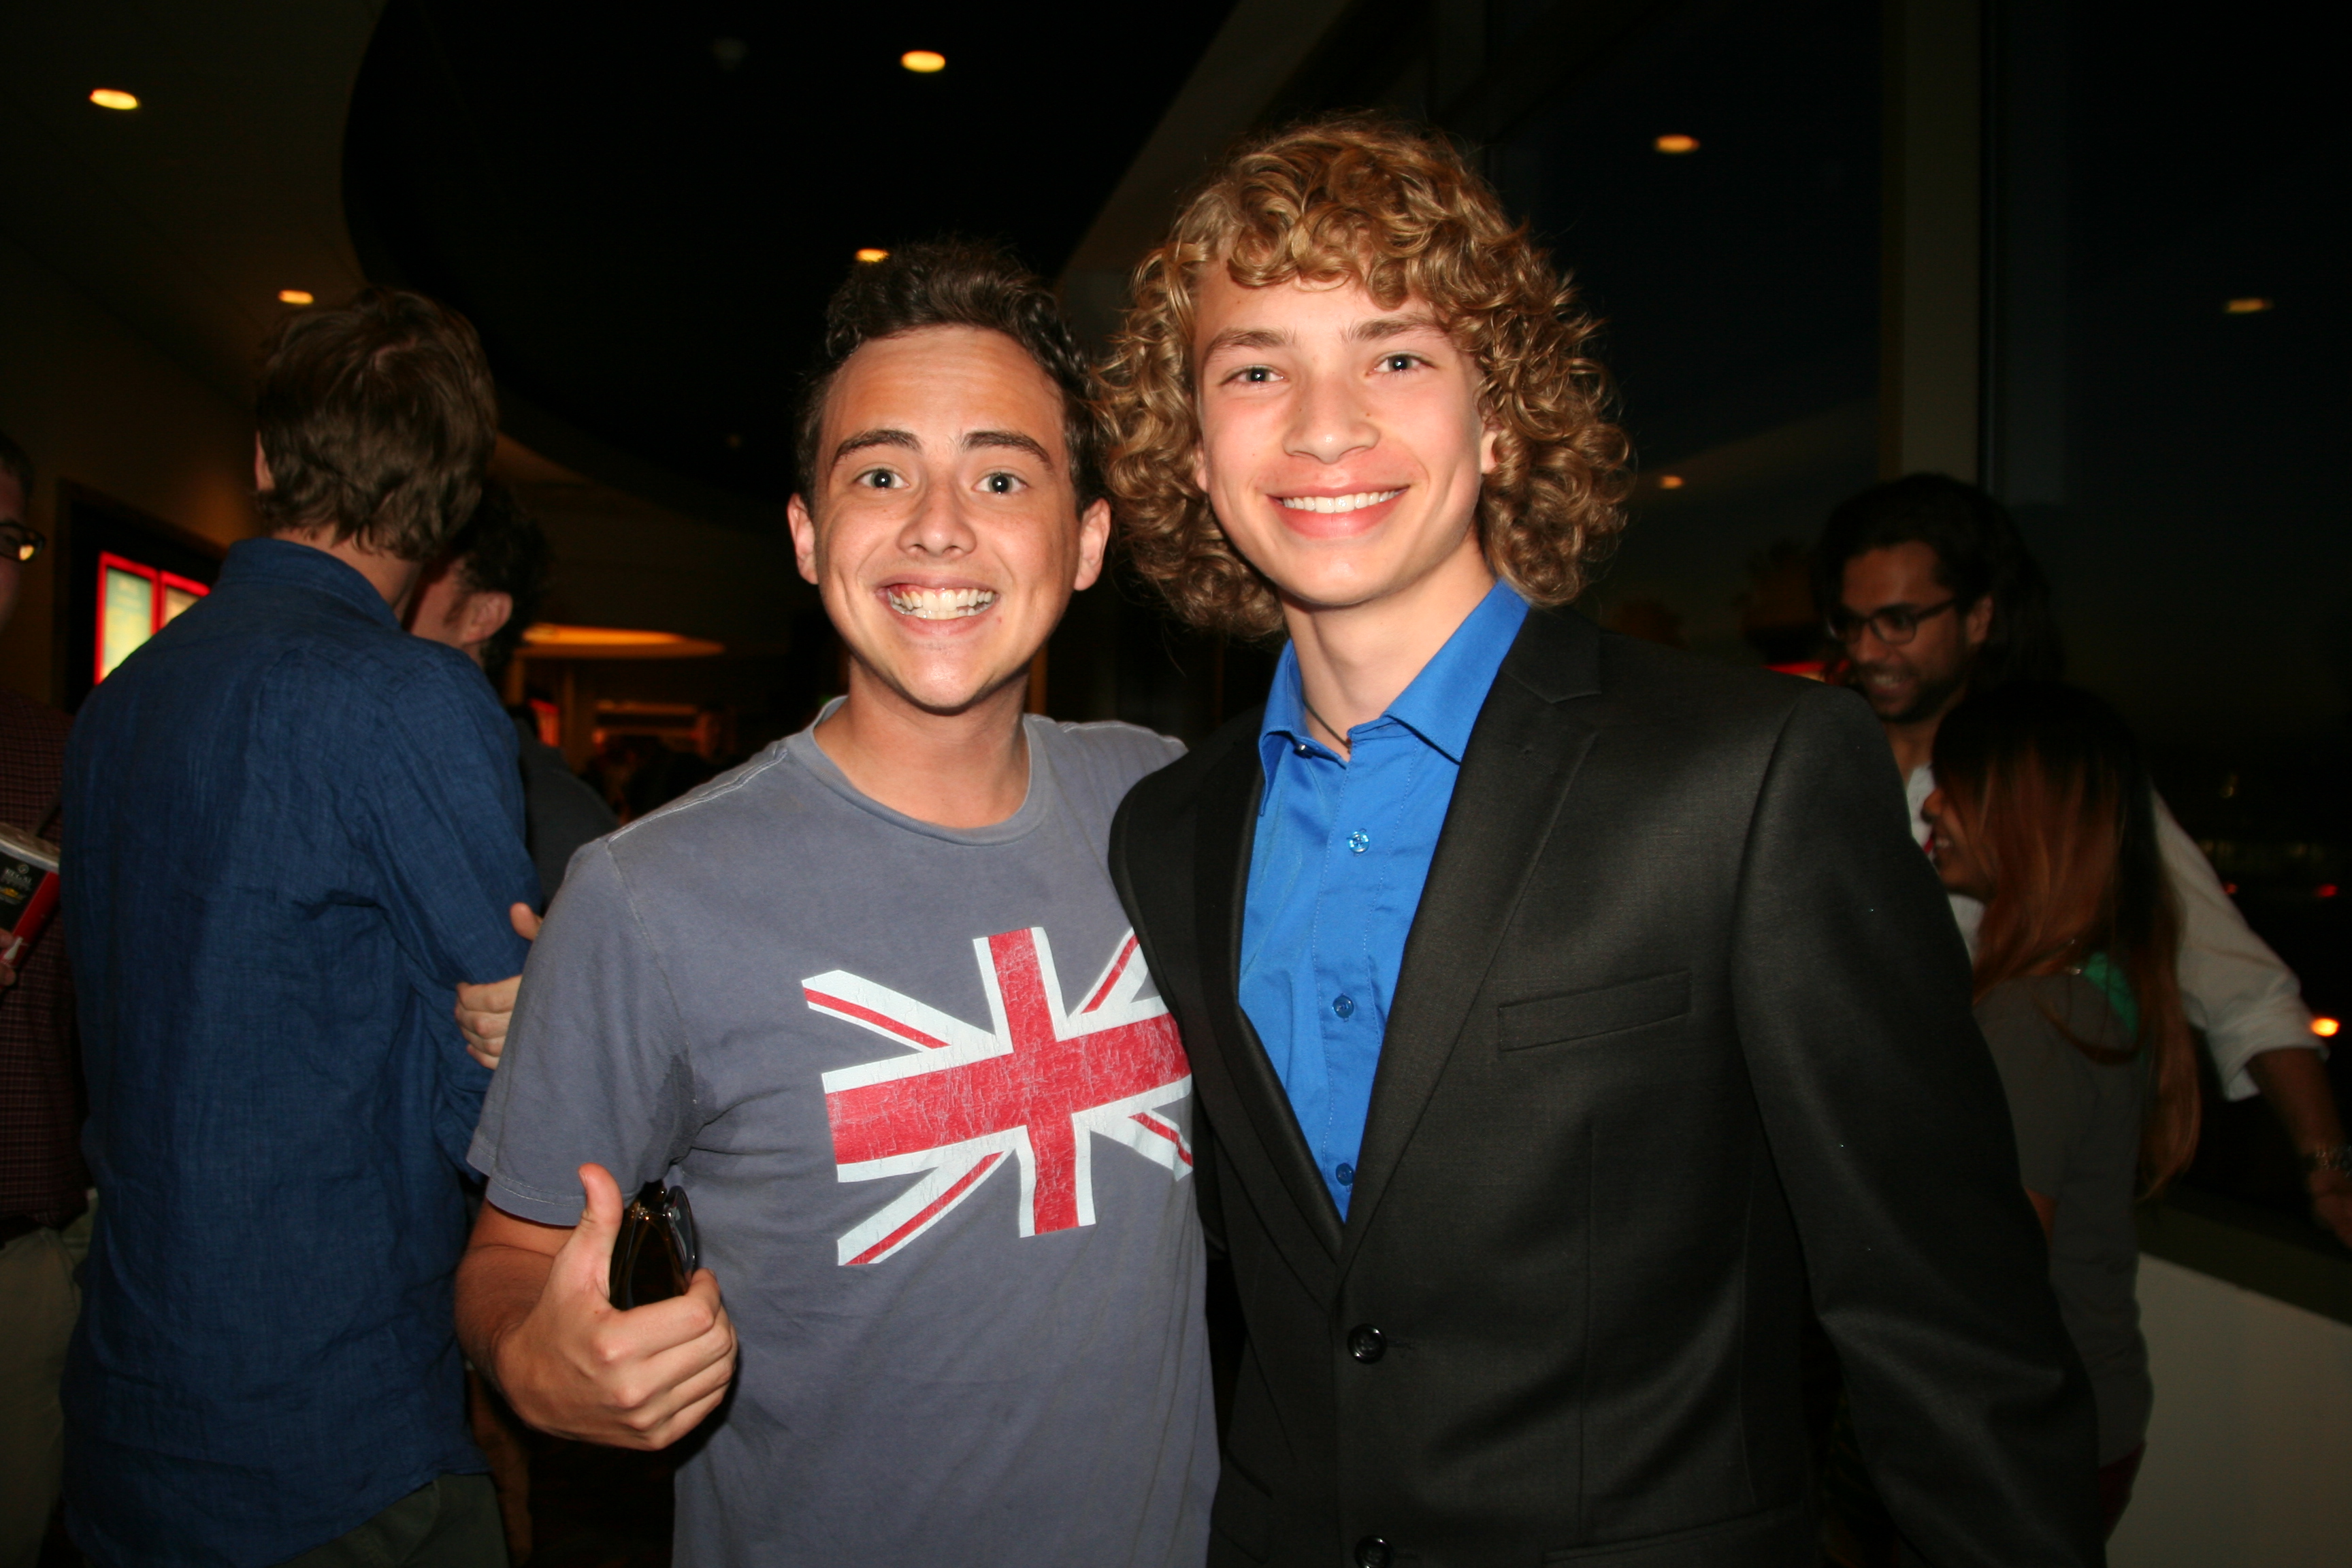 Ryan Malgarini and Will Meyers at the LAFF Premiere of The Young Kieslowski (June 17, 2014)